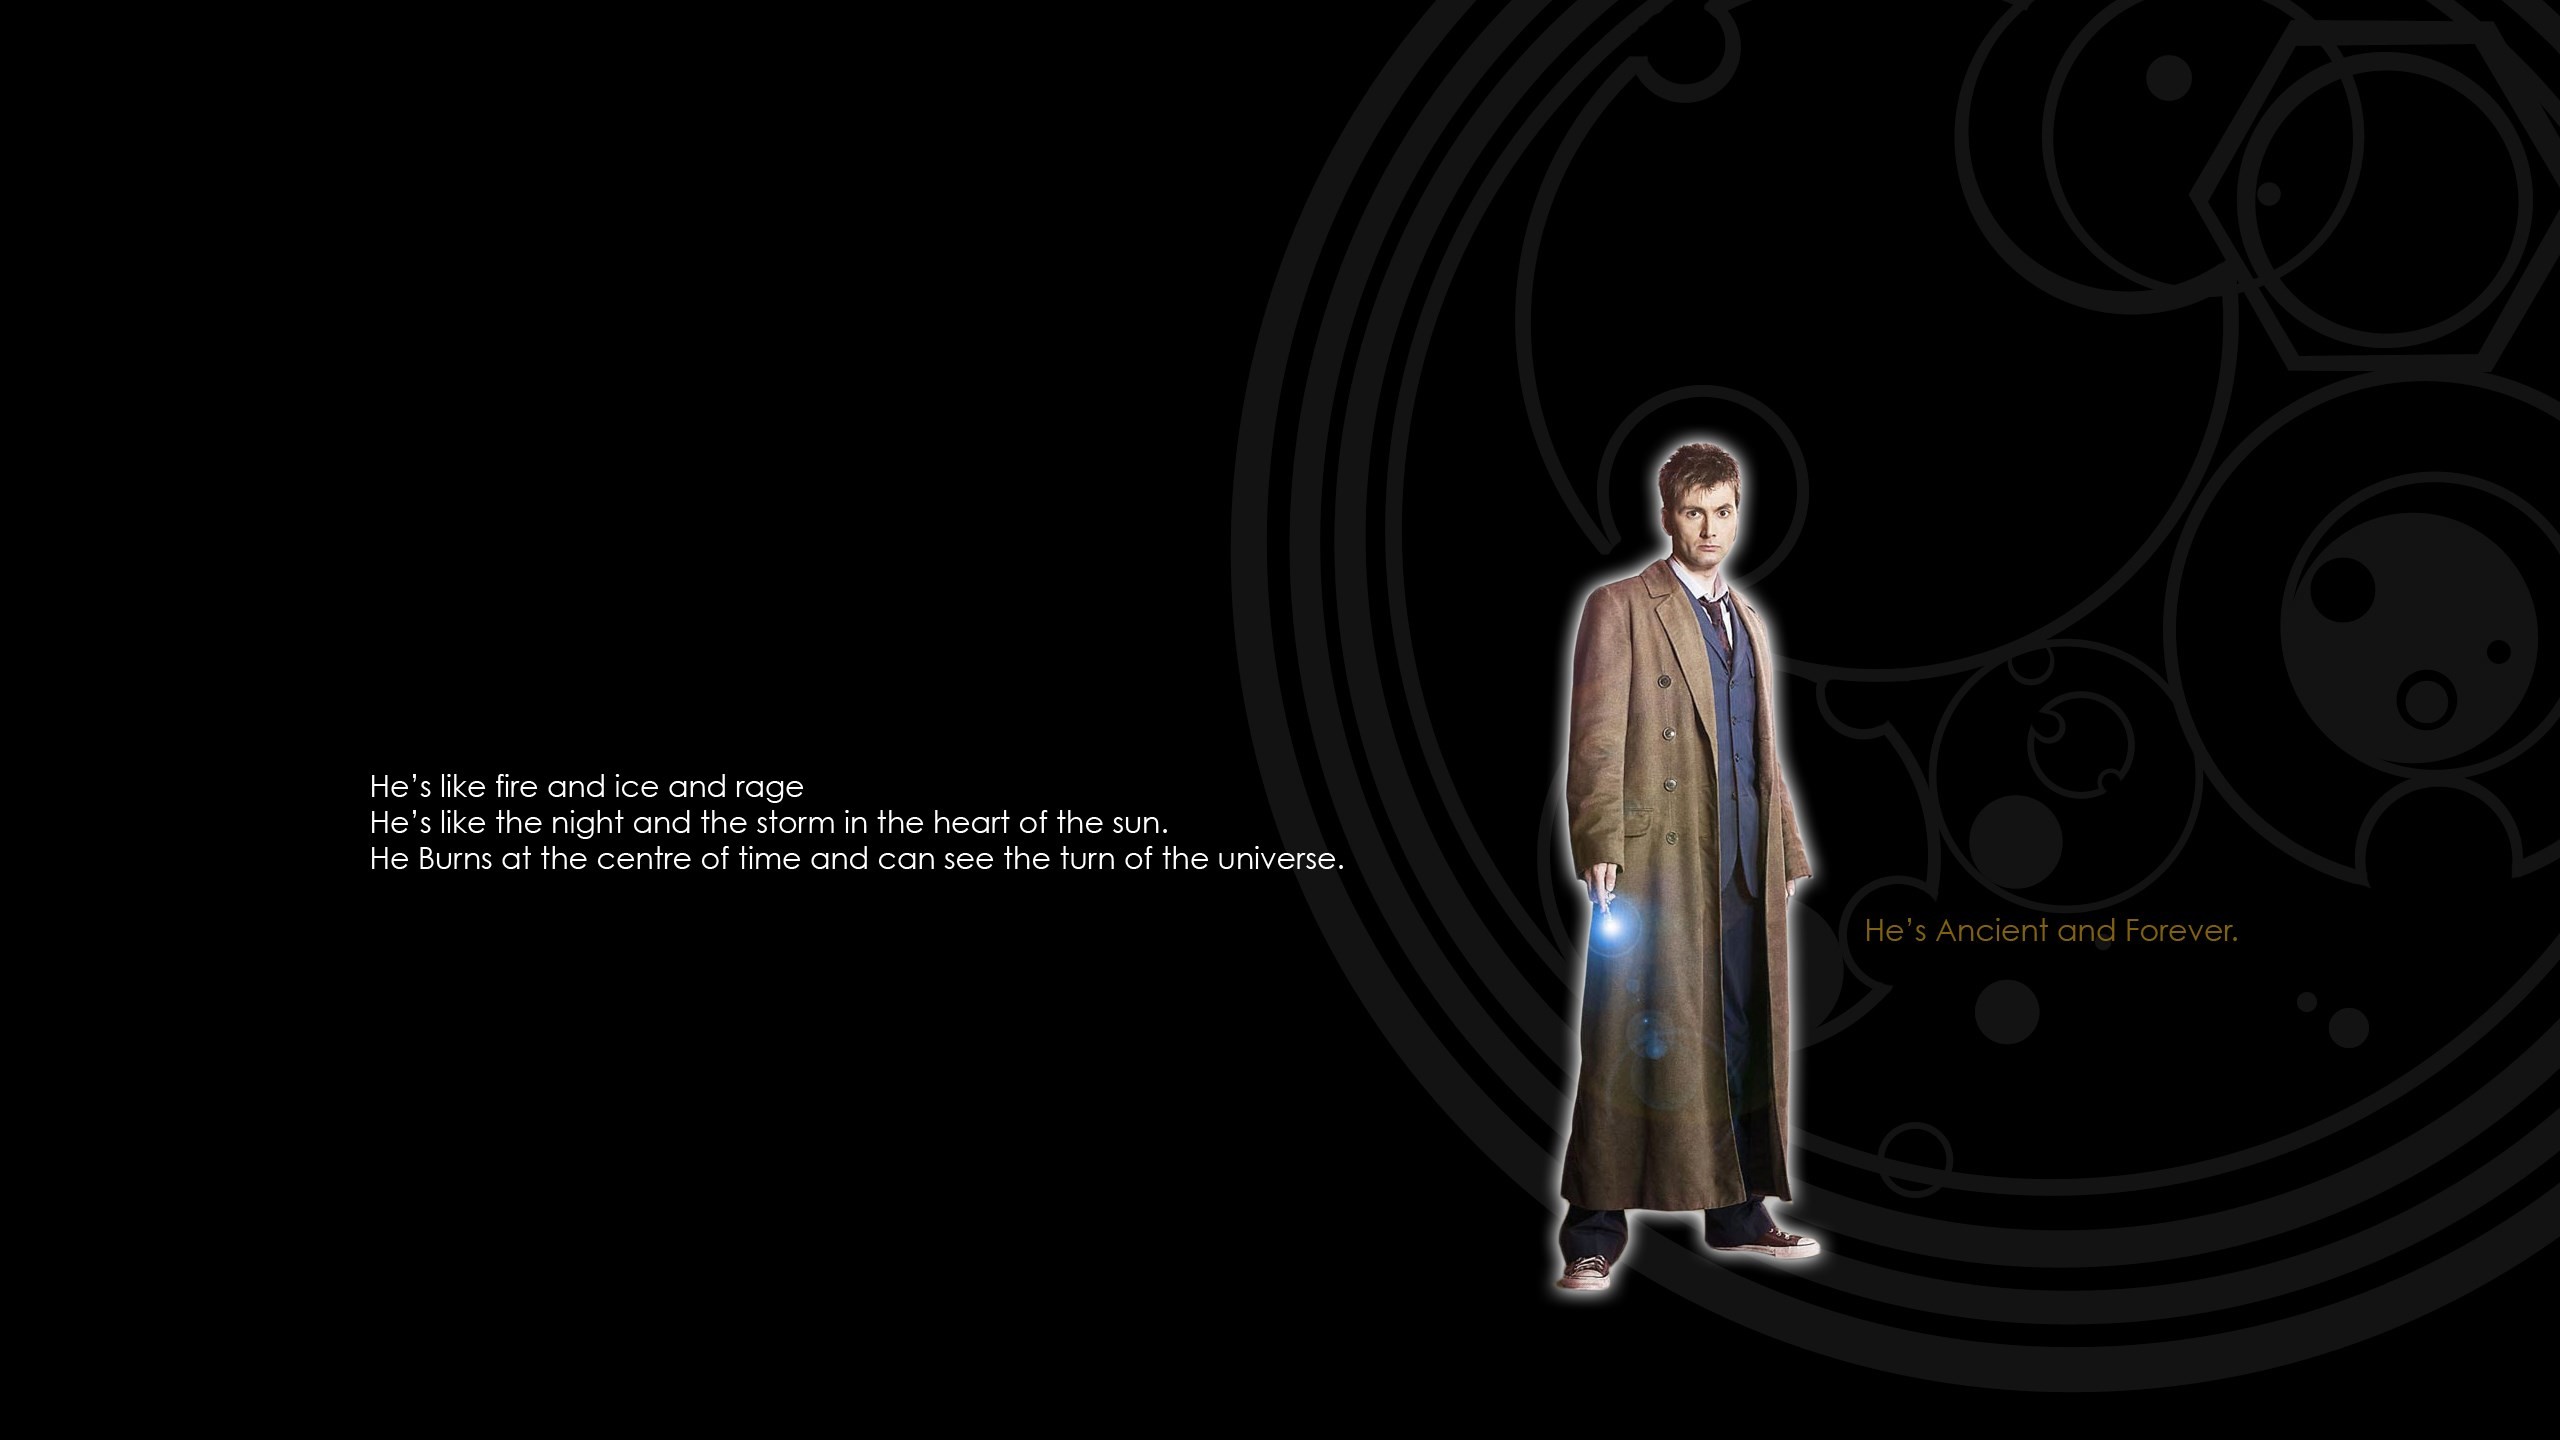 Free desktop backgrounds for doctor who